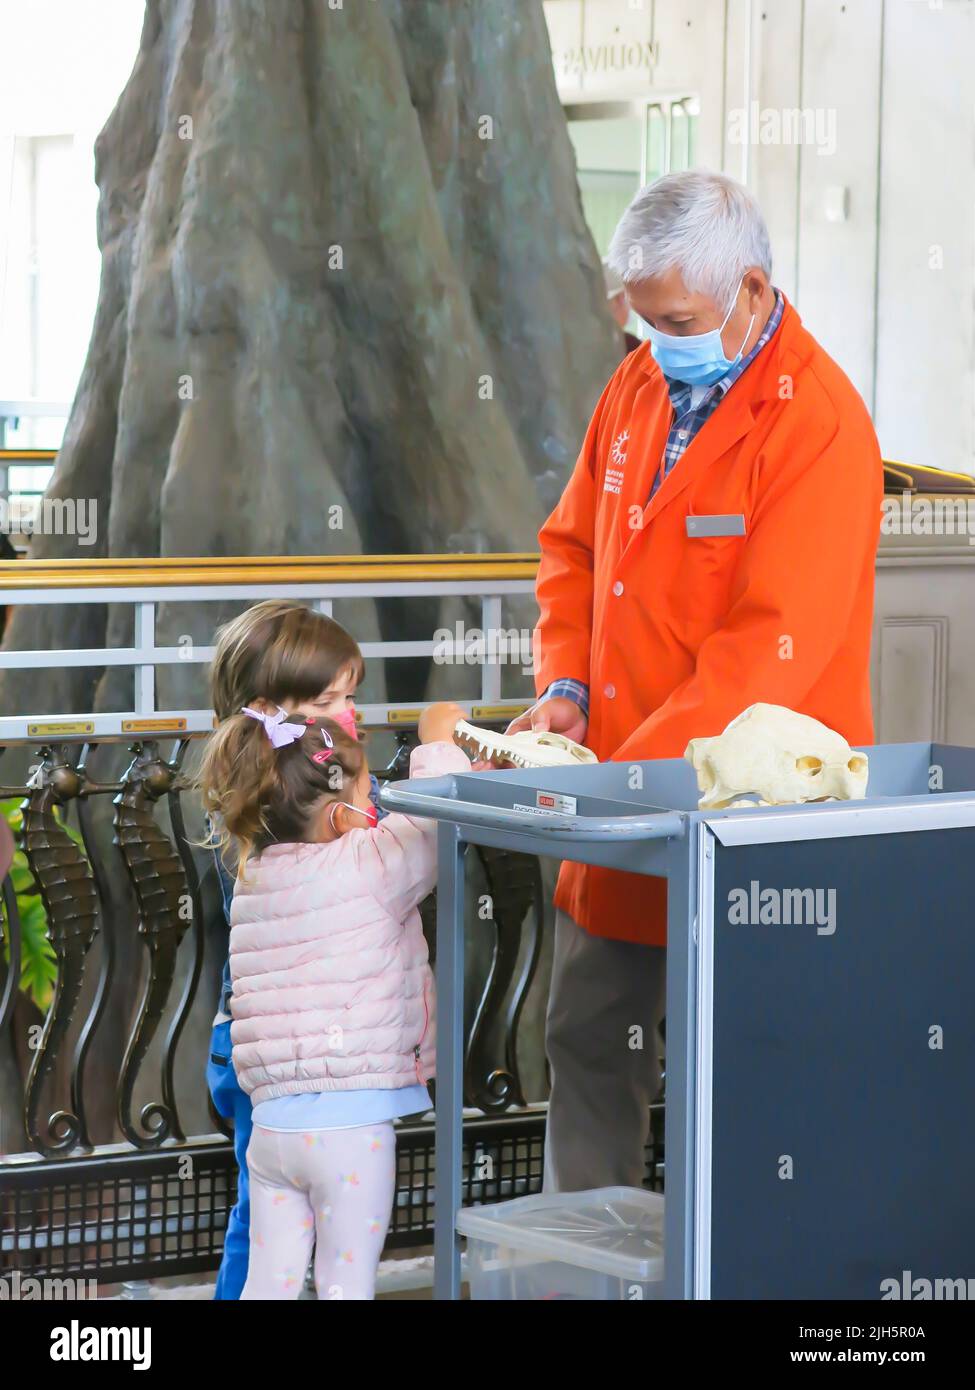 A Volunteer at the California Academy of Sciences Engaging Children in Scientific Discussion Stock Photo